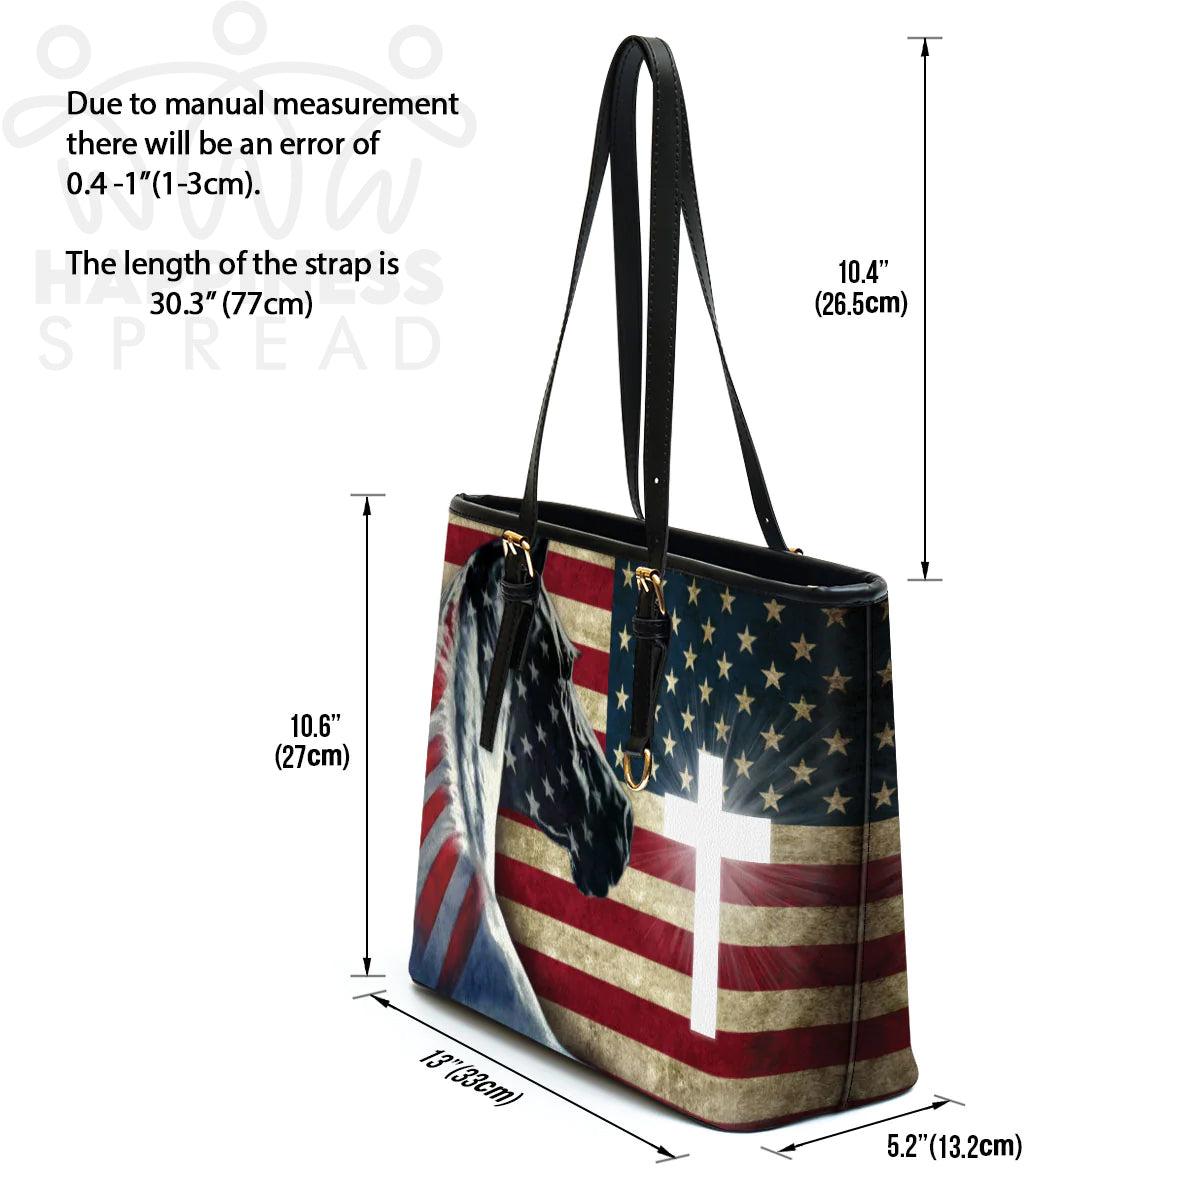 Christianart Handbag, Personalized Hand Bag, American Flag 4th of July, Personalized Gifts, Gifts for Women. - Christian Art Bag